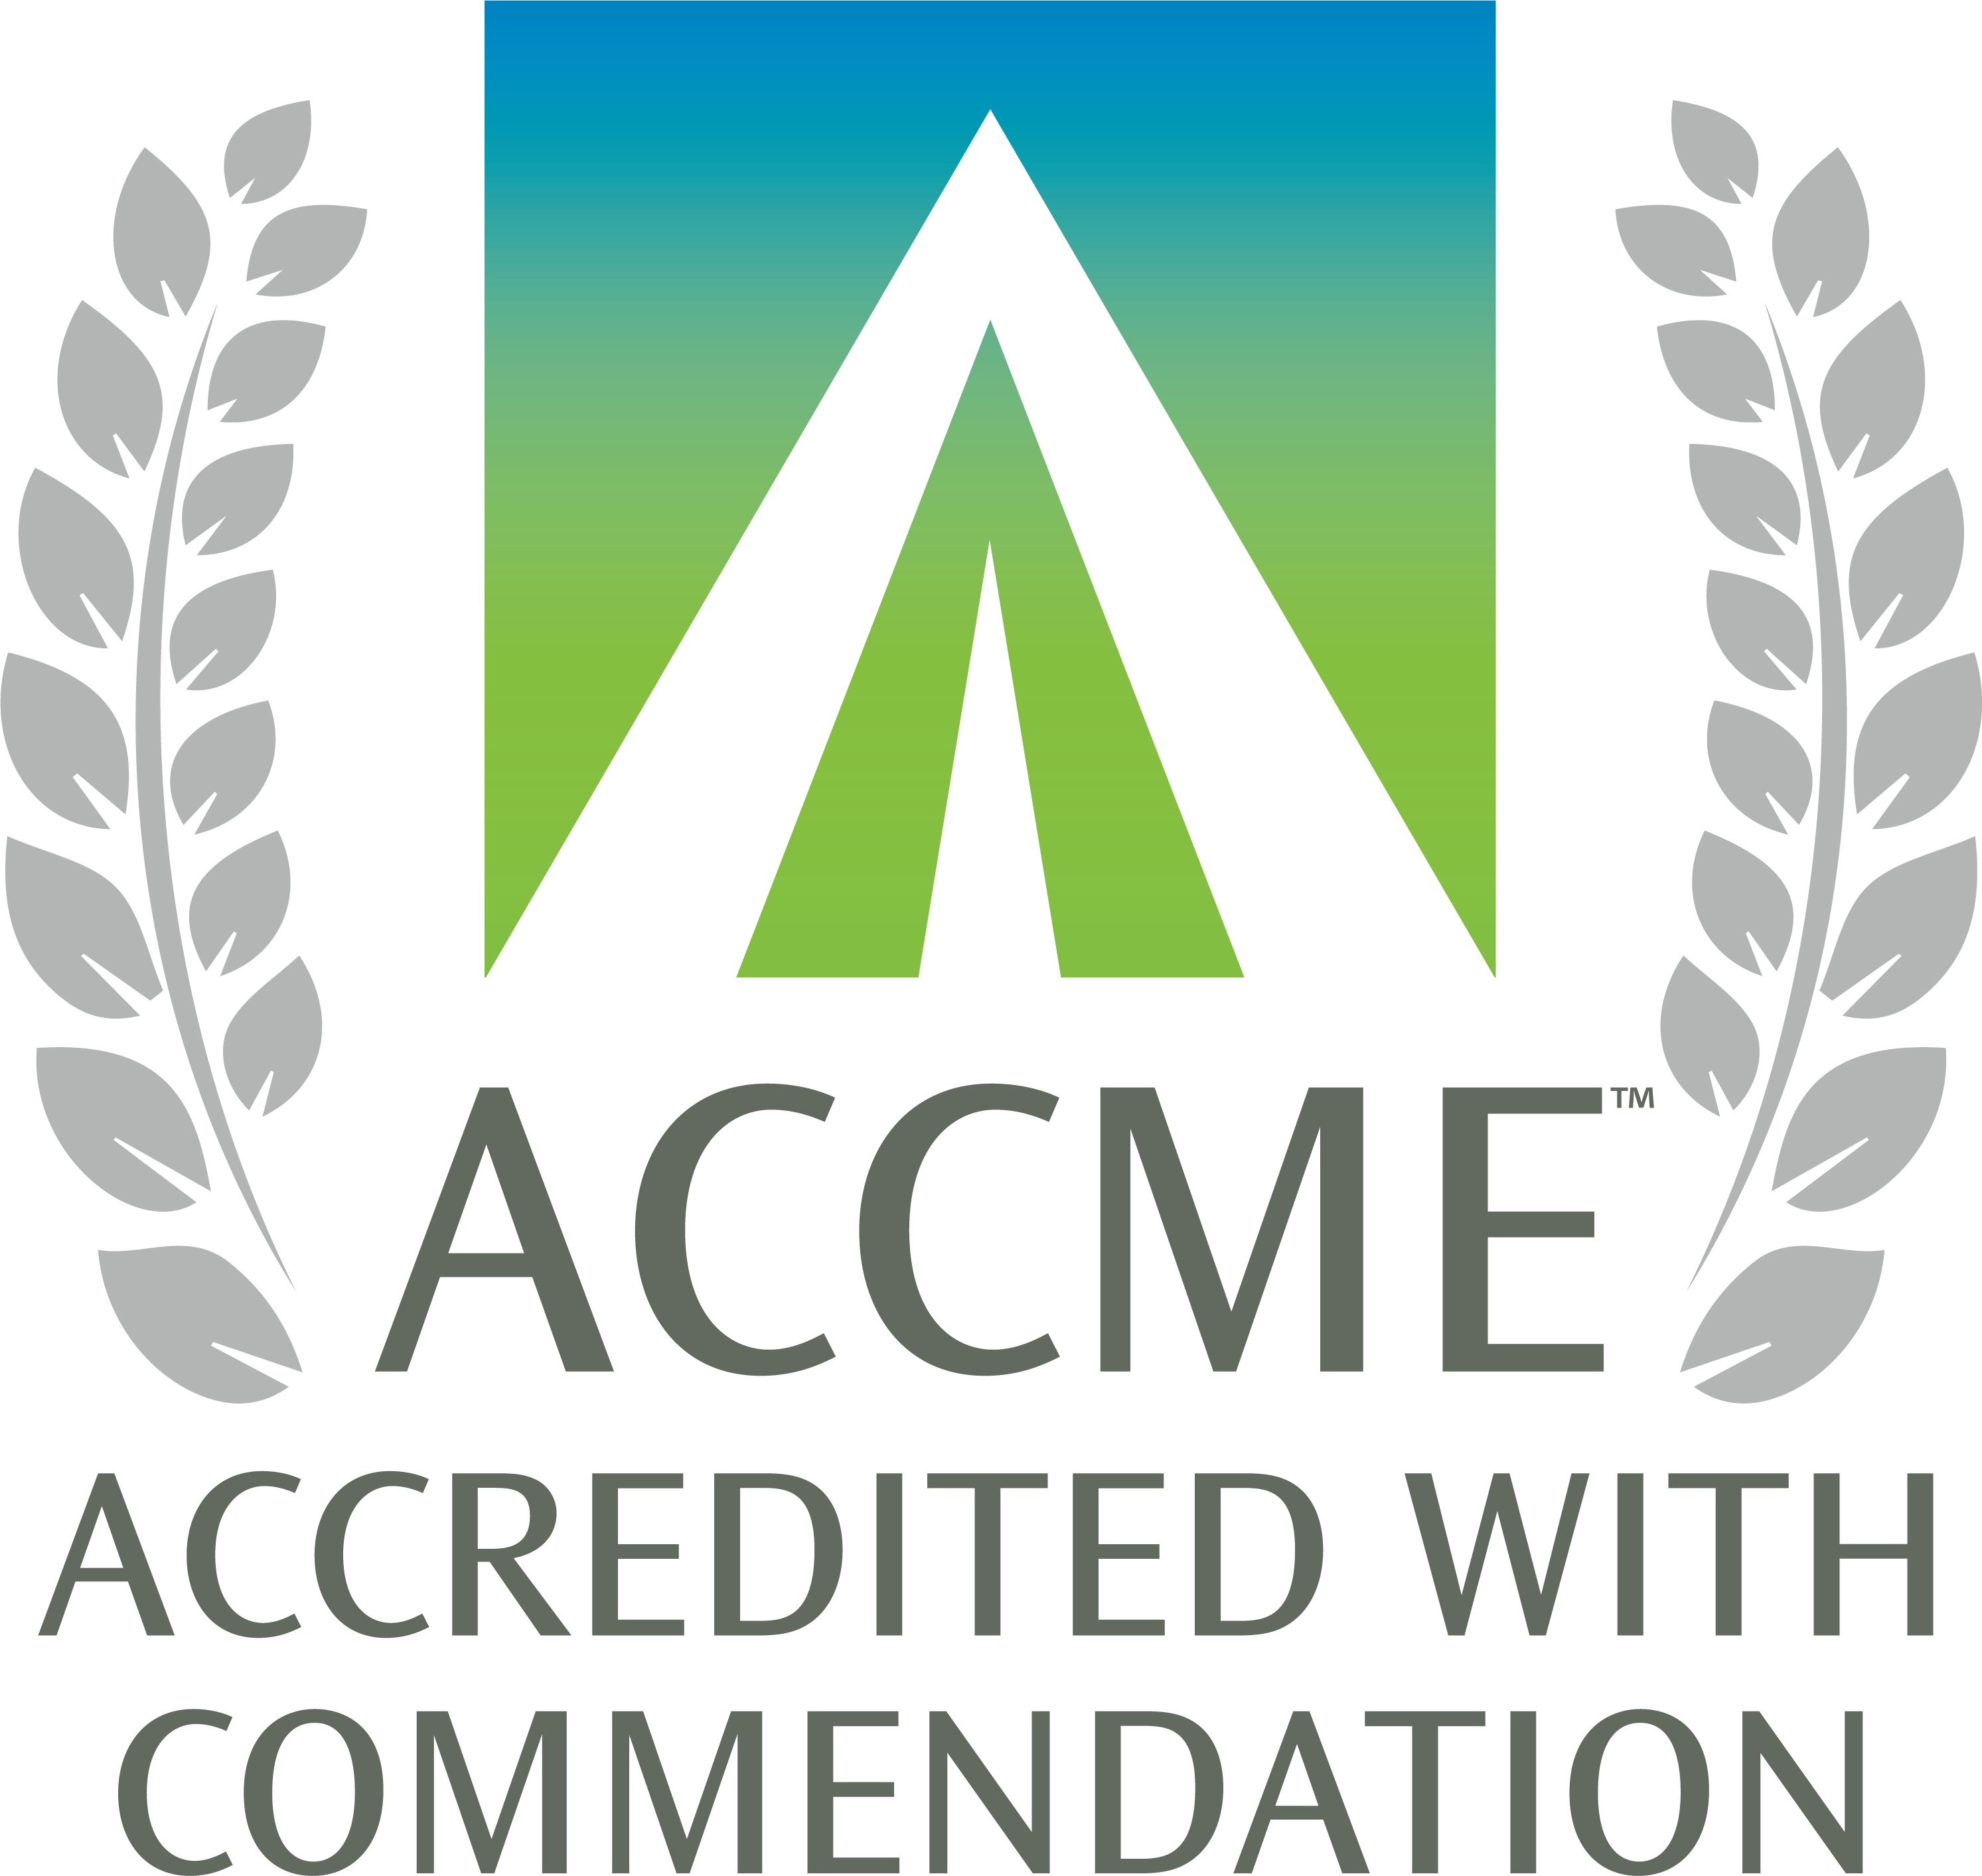 ACCME accredited